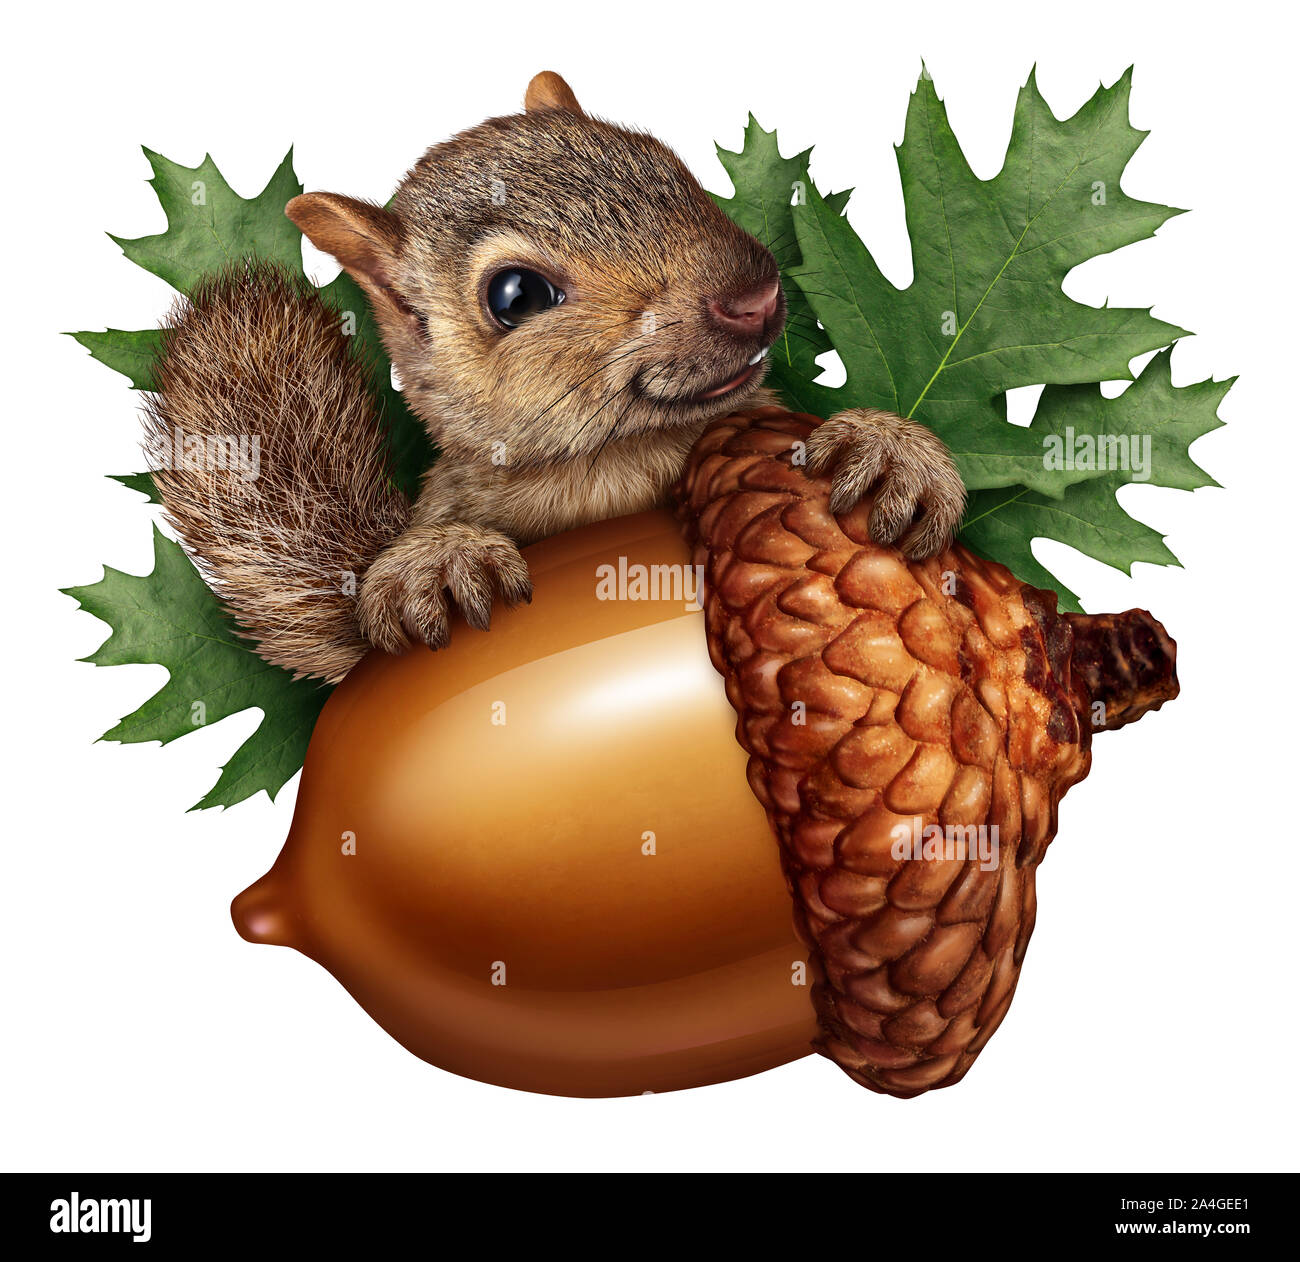 Cute squirrel acorn isolated holding a giant tree nut as a funny autumn symbol with oak leaves and furry animal storing nuts. Stock Photo